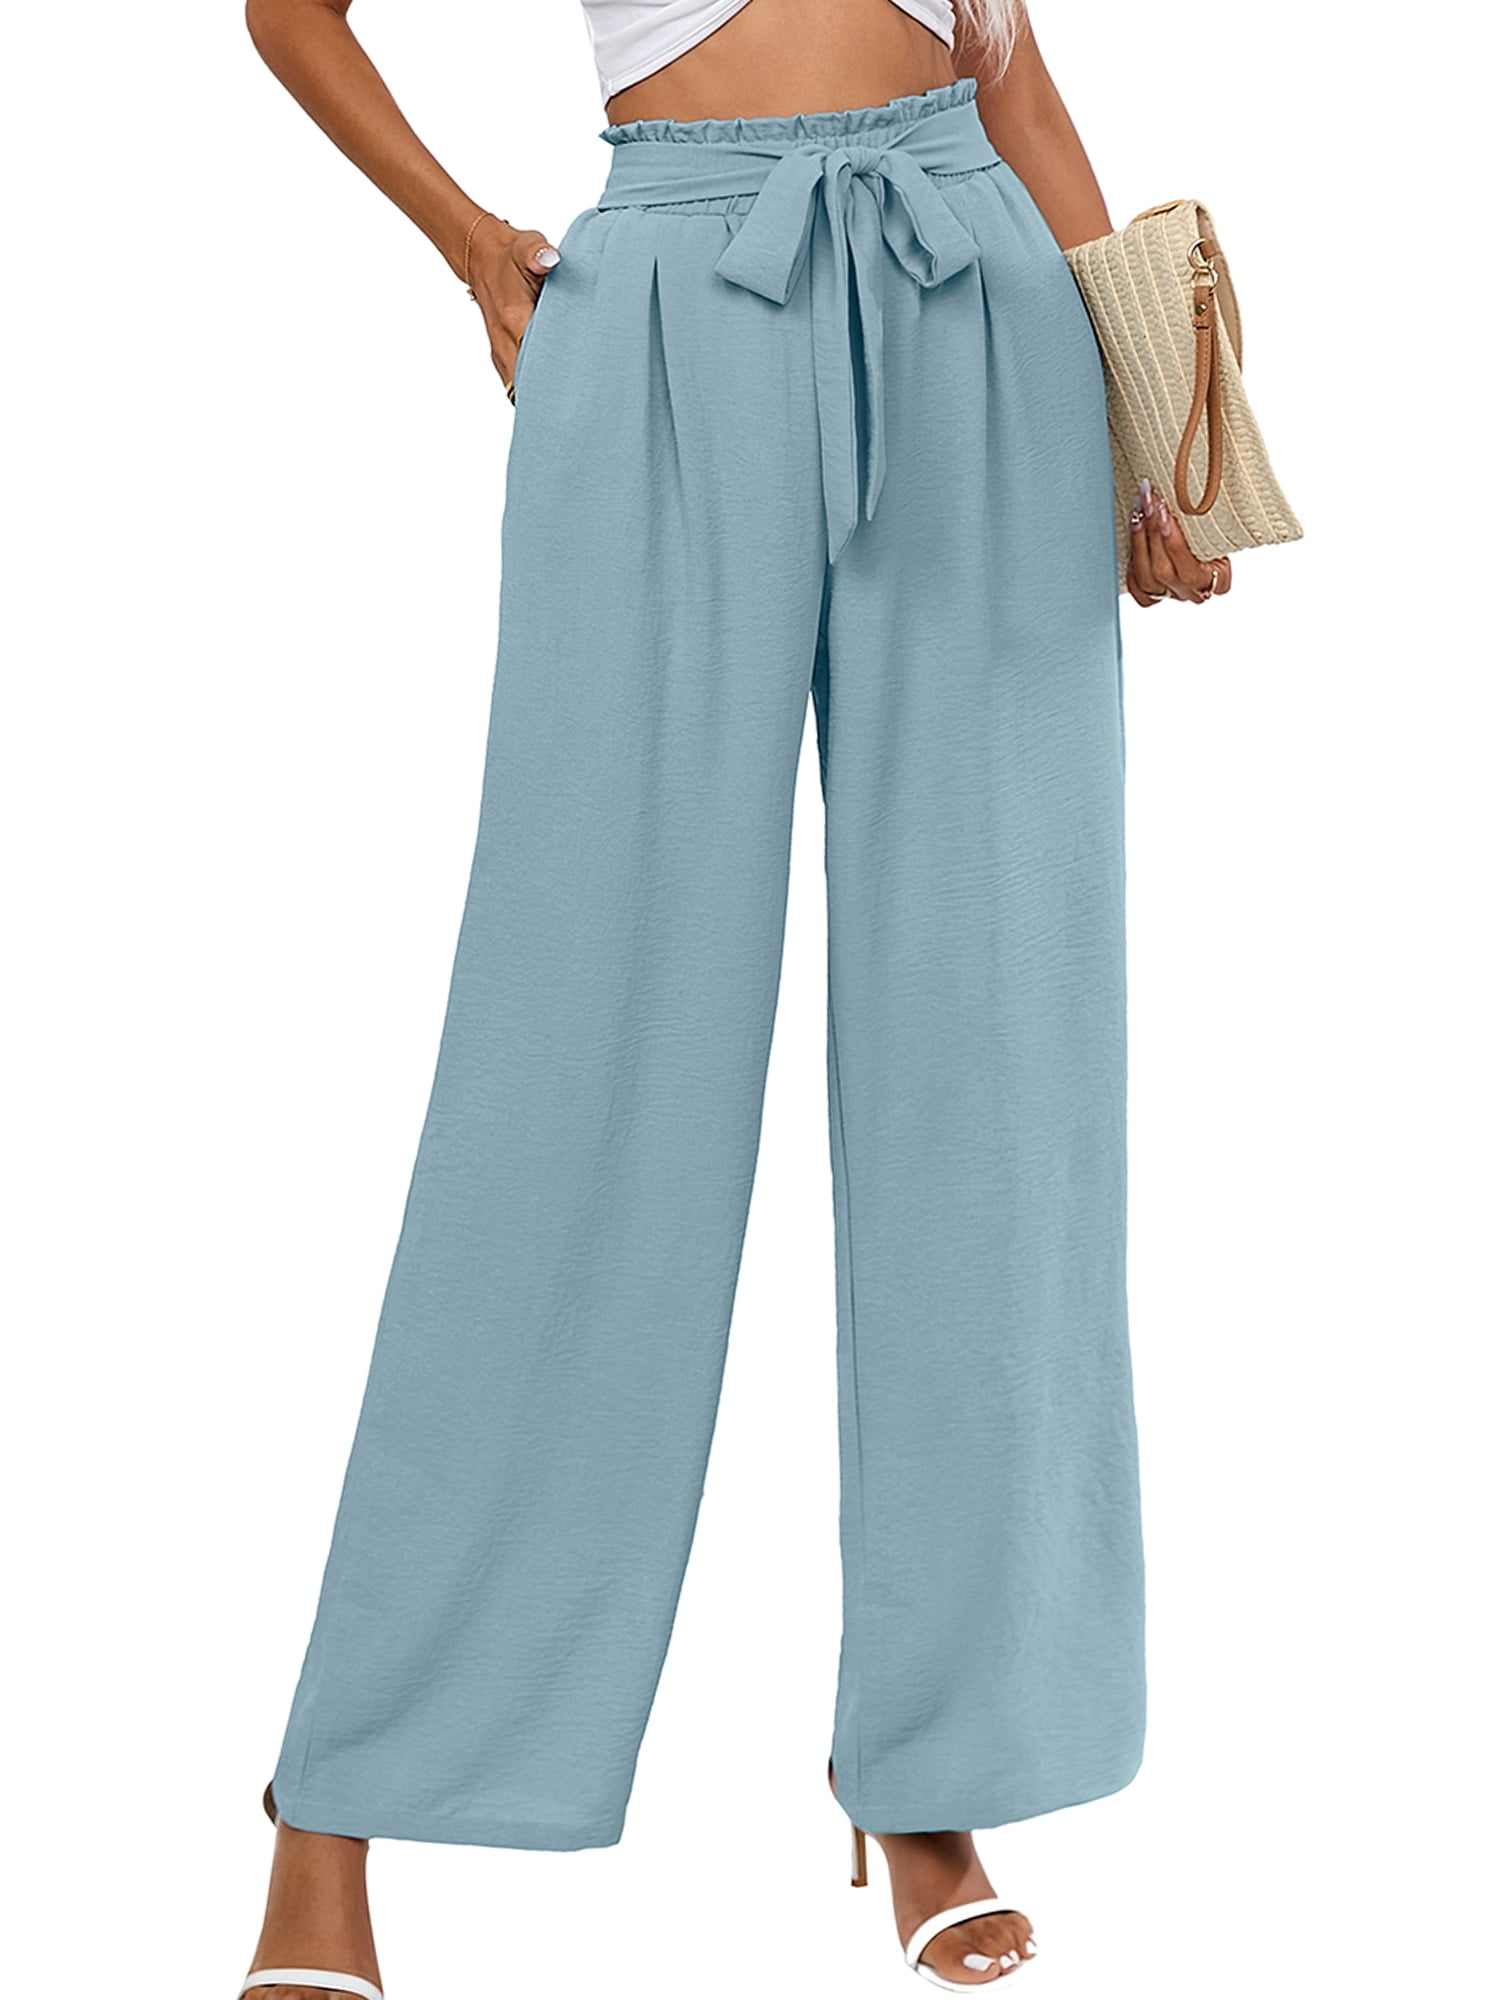 Women's Ladies Spring Summer Lounge Pants Casual Loose Wide Leg Trousers  With Pockets